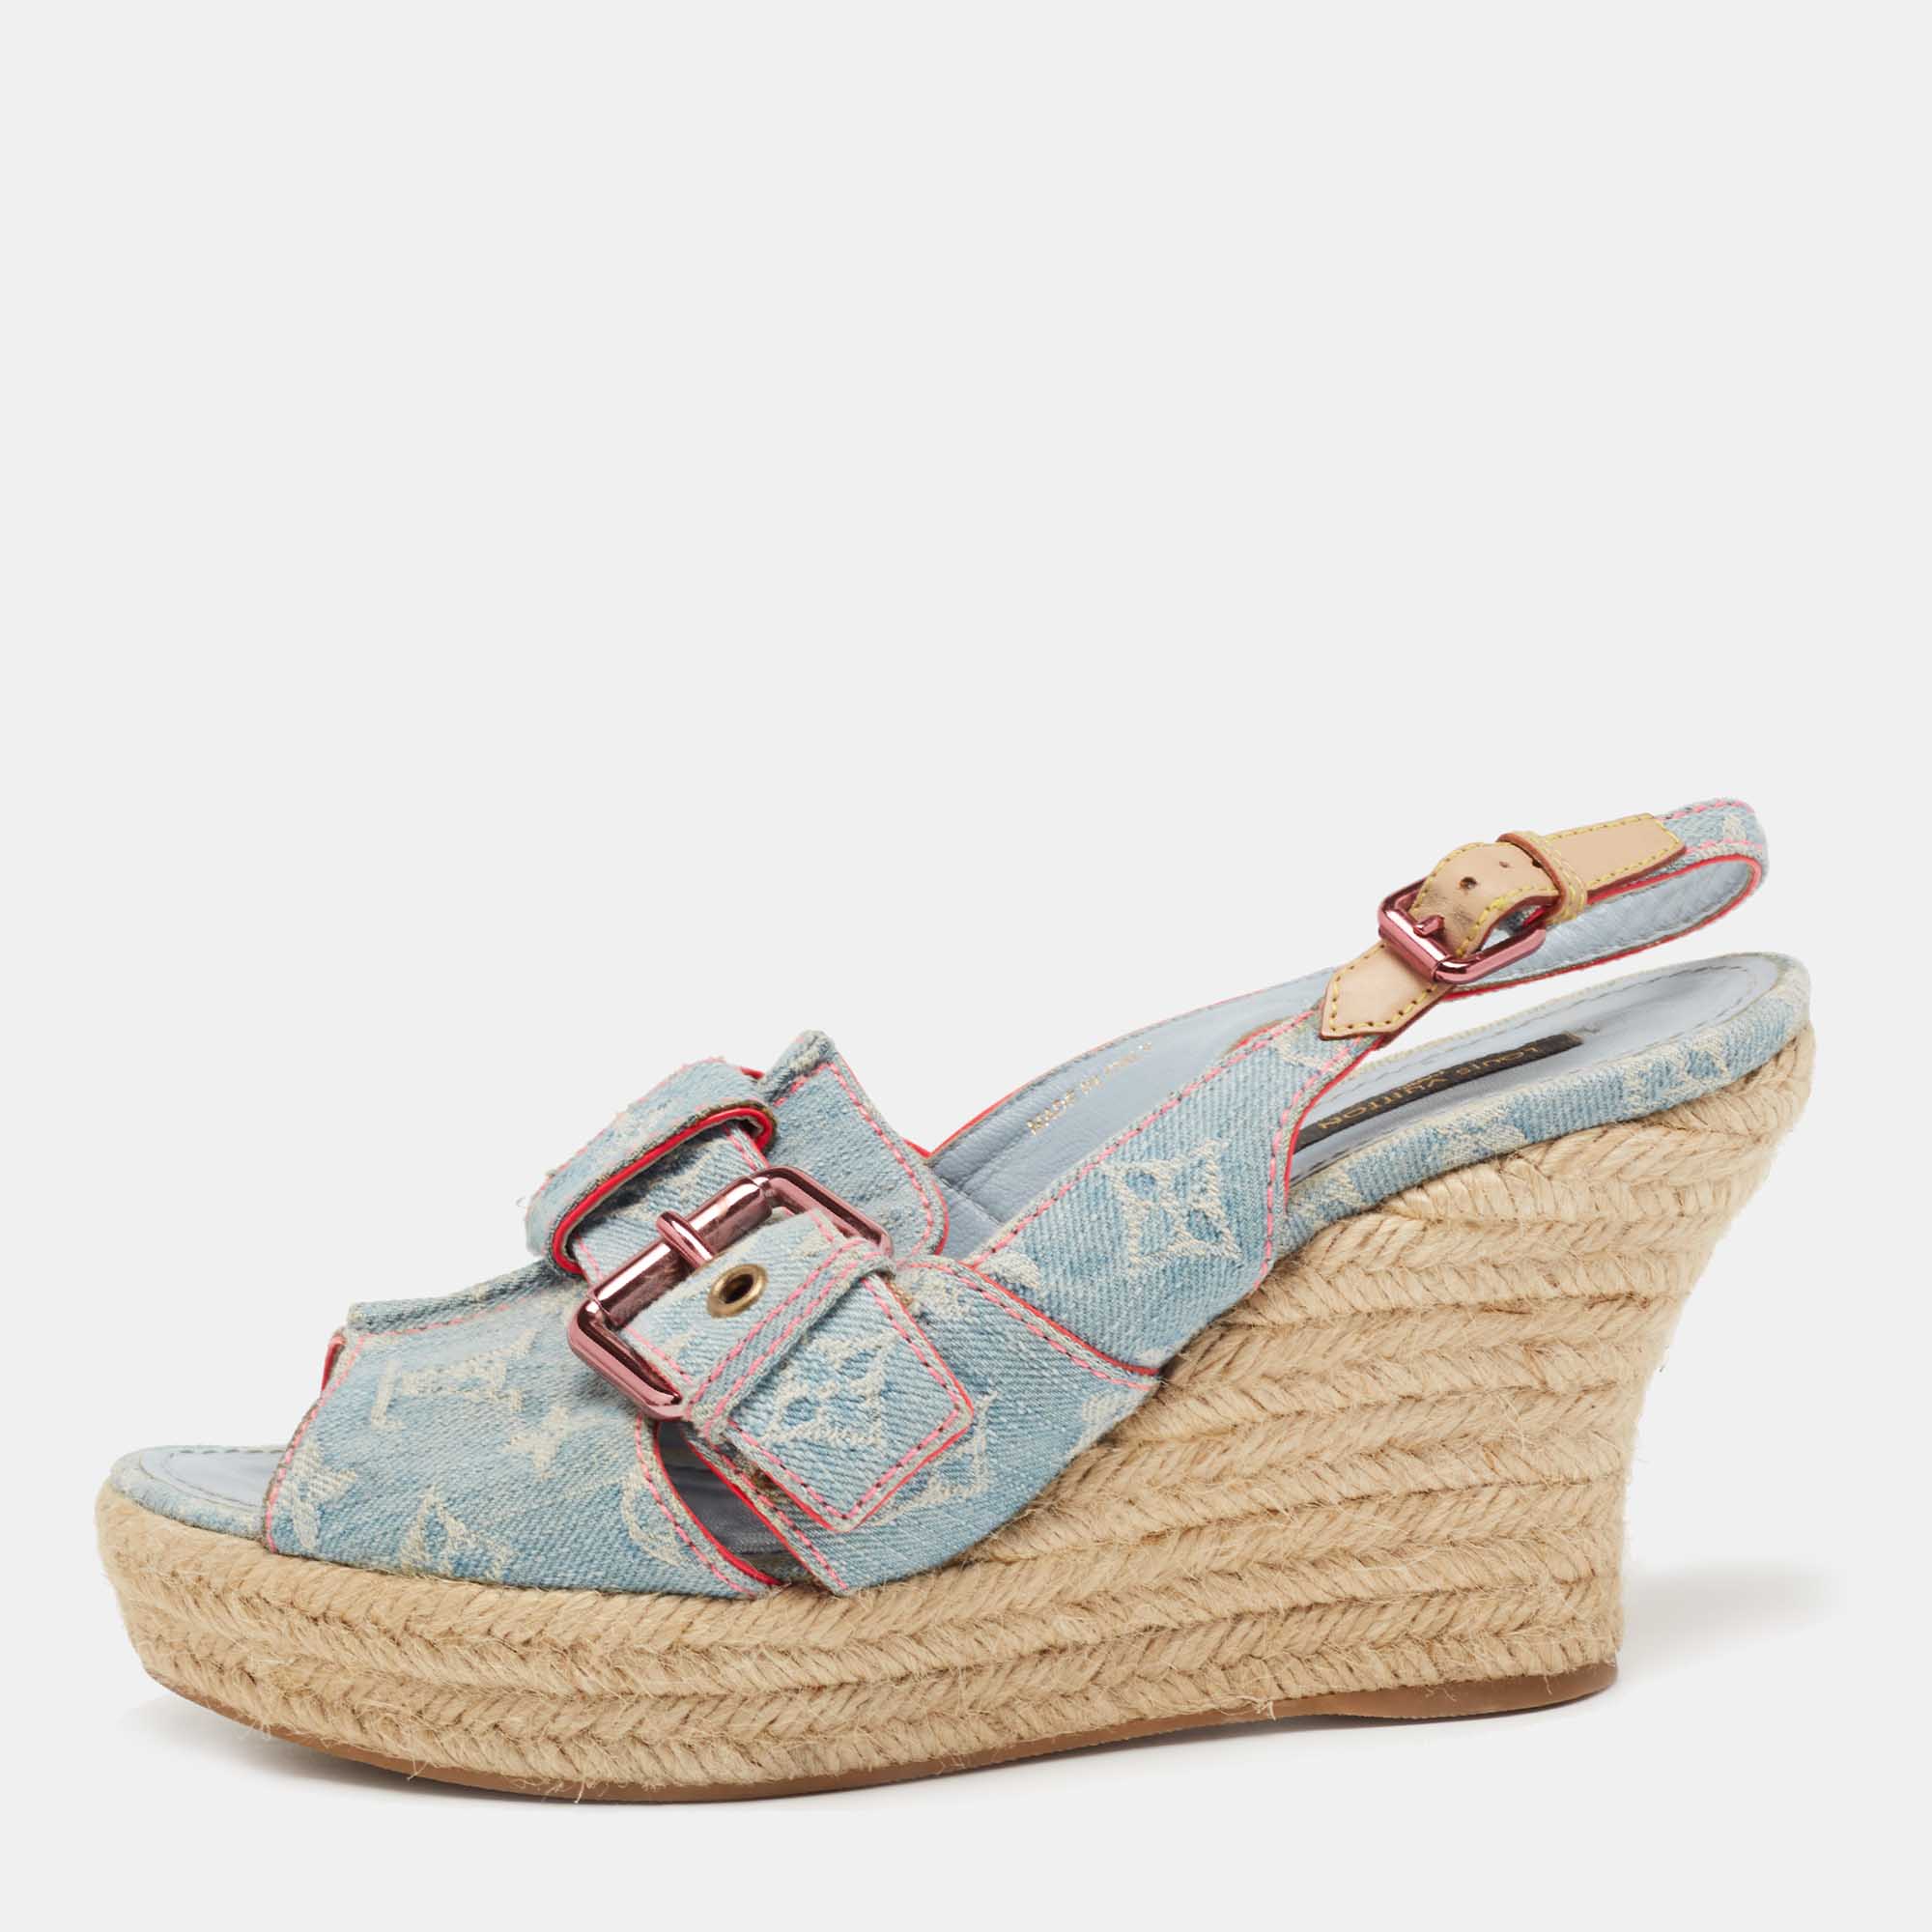 Stylishly chic these espadrille slingback wedges by Louis Vuitton have been crafted in denim. They come with side buckle fastenings and the insoles are lined with leather for a smooth experience. A perfect fusion with your denim outfit or a summer dress